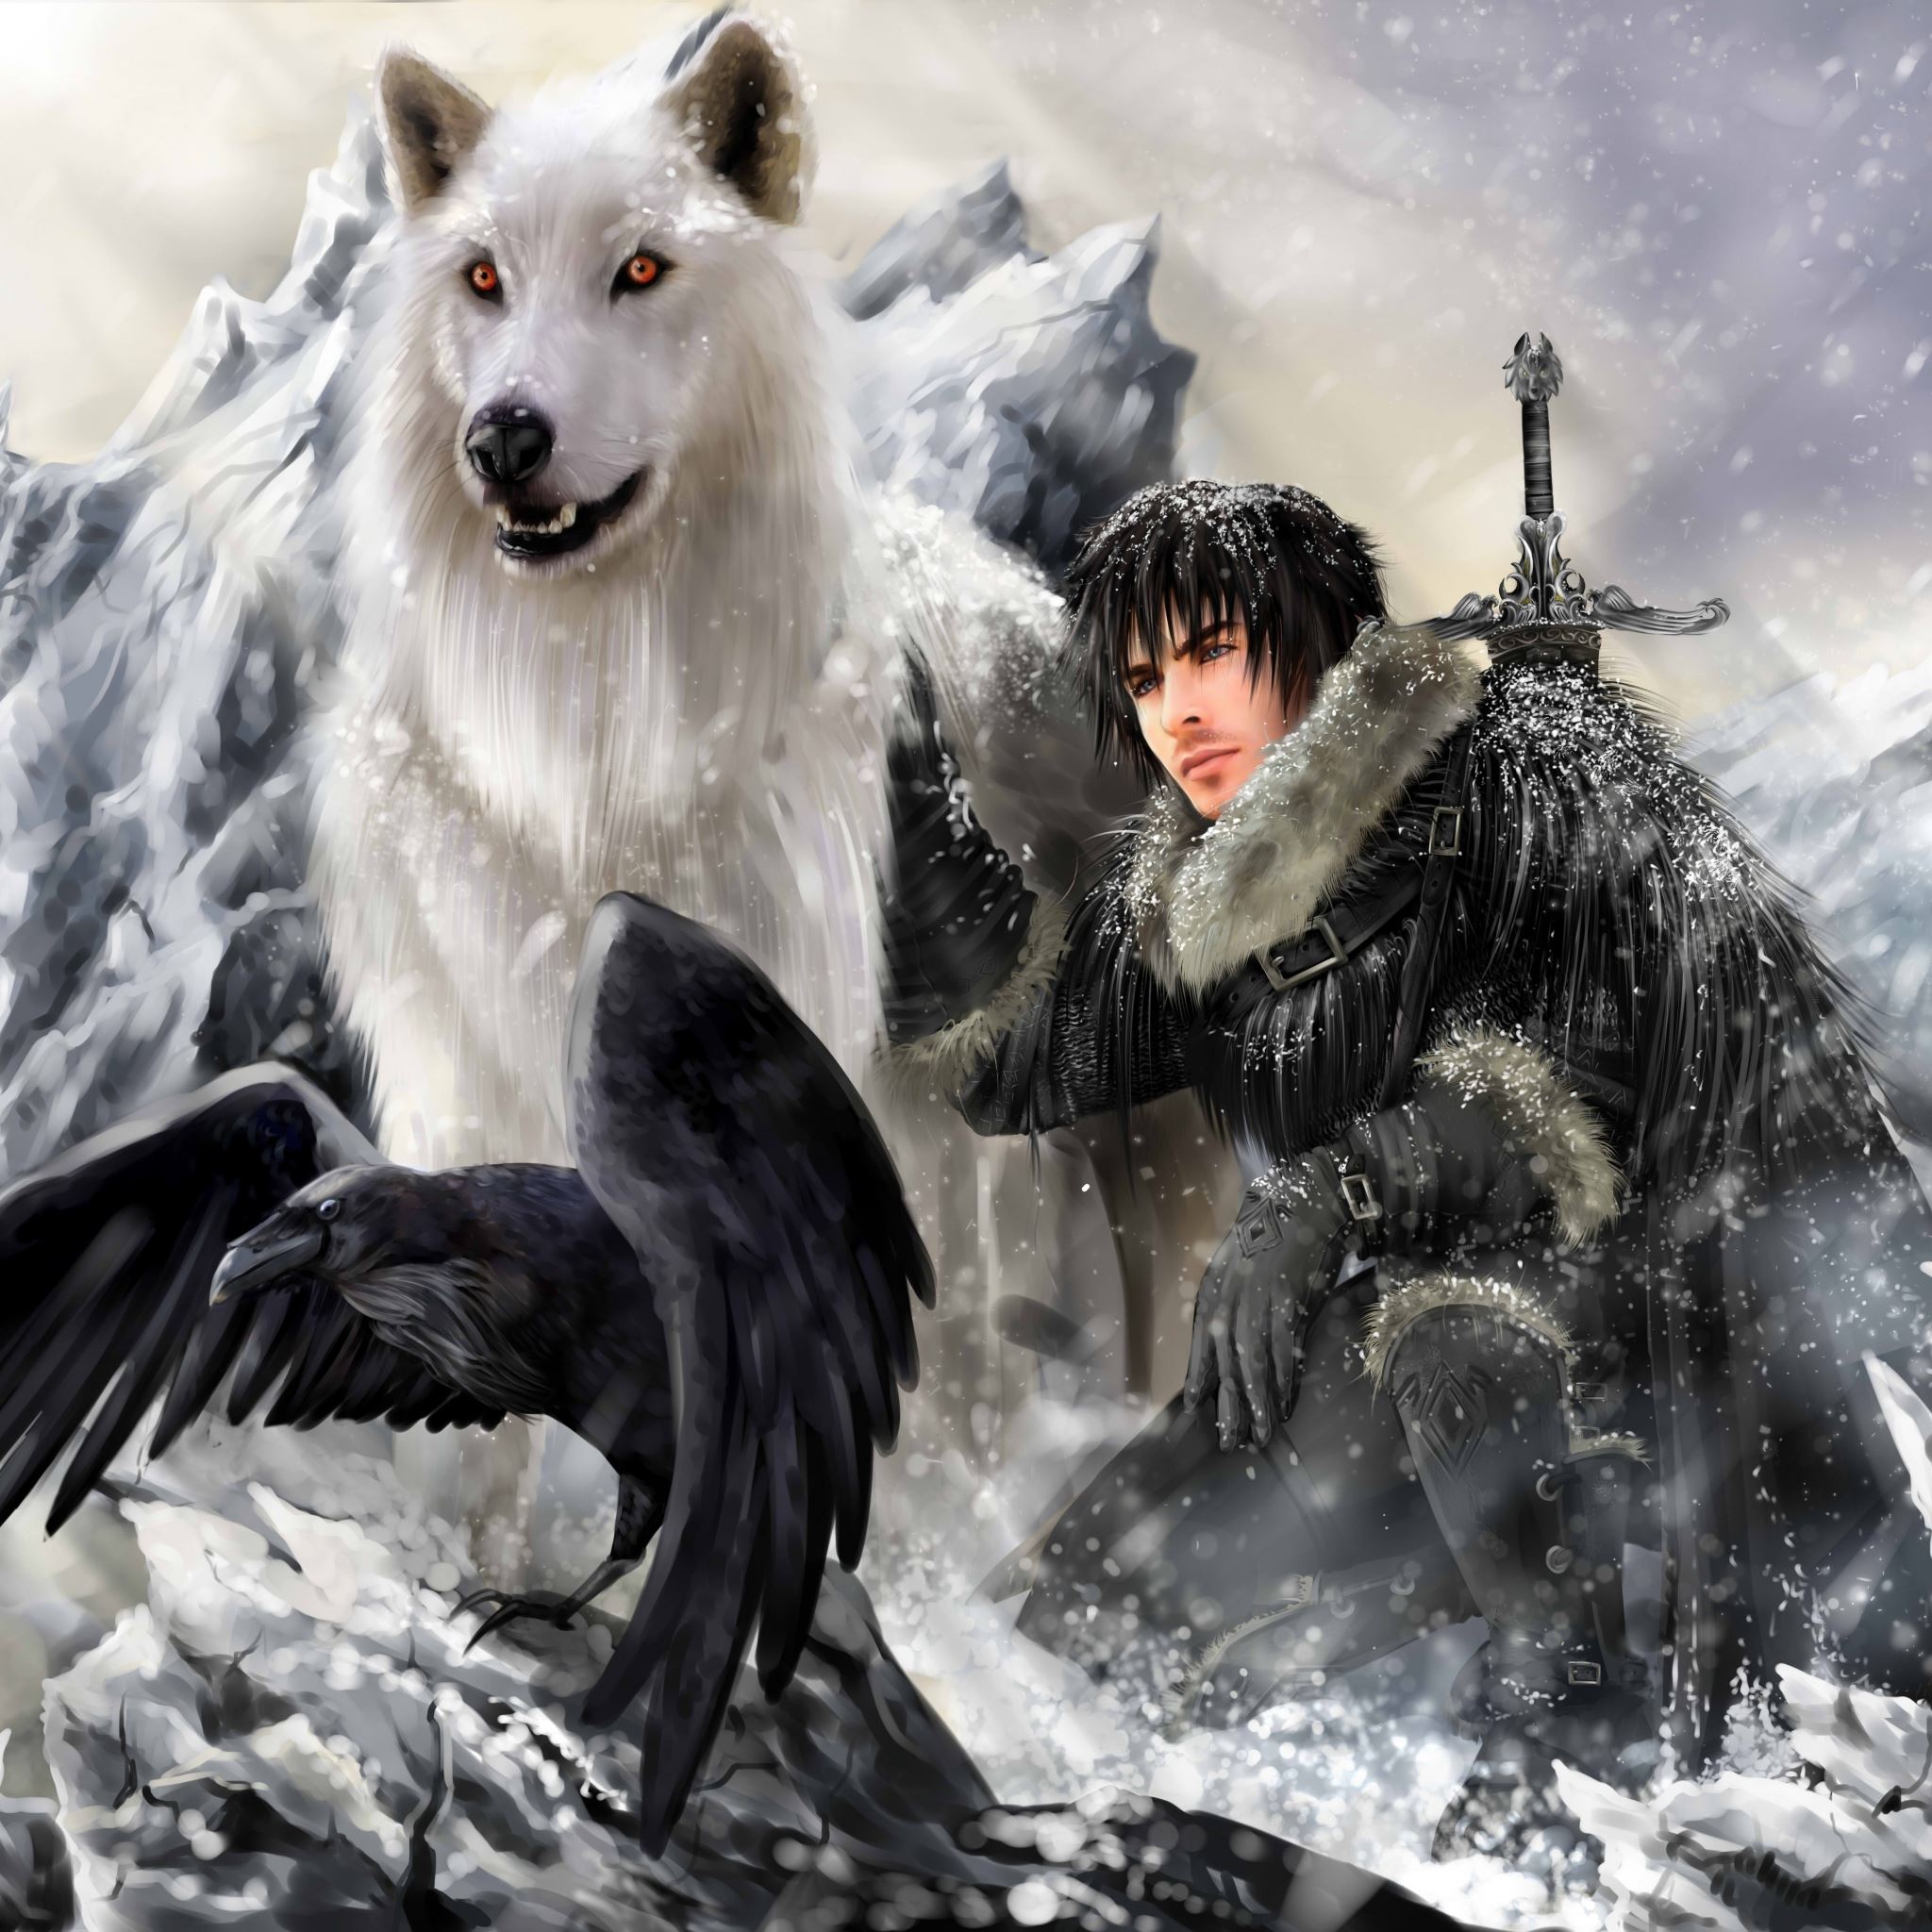 The Song Of Ice And Fire Game Of Thrones Jon Snow Ghost Direwolf Stark Clan iPad Air wallpaper 